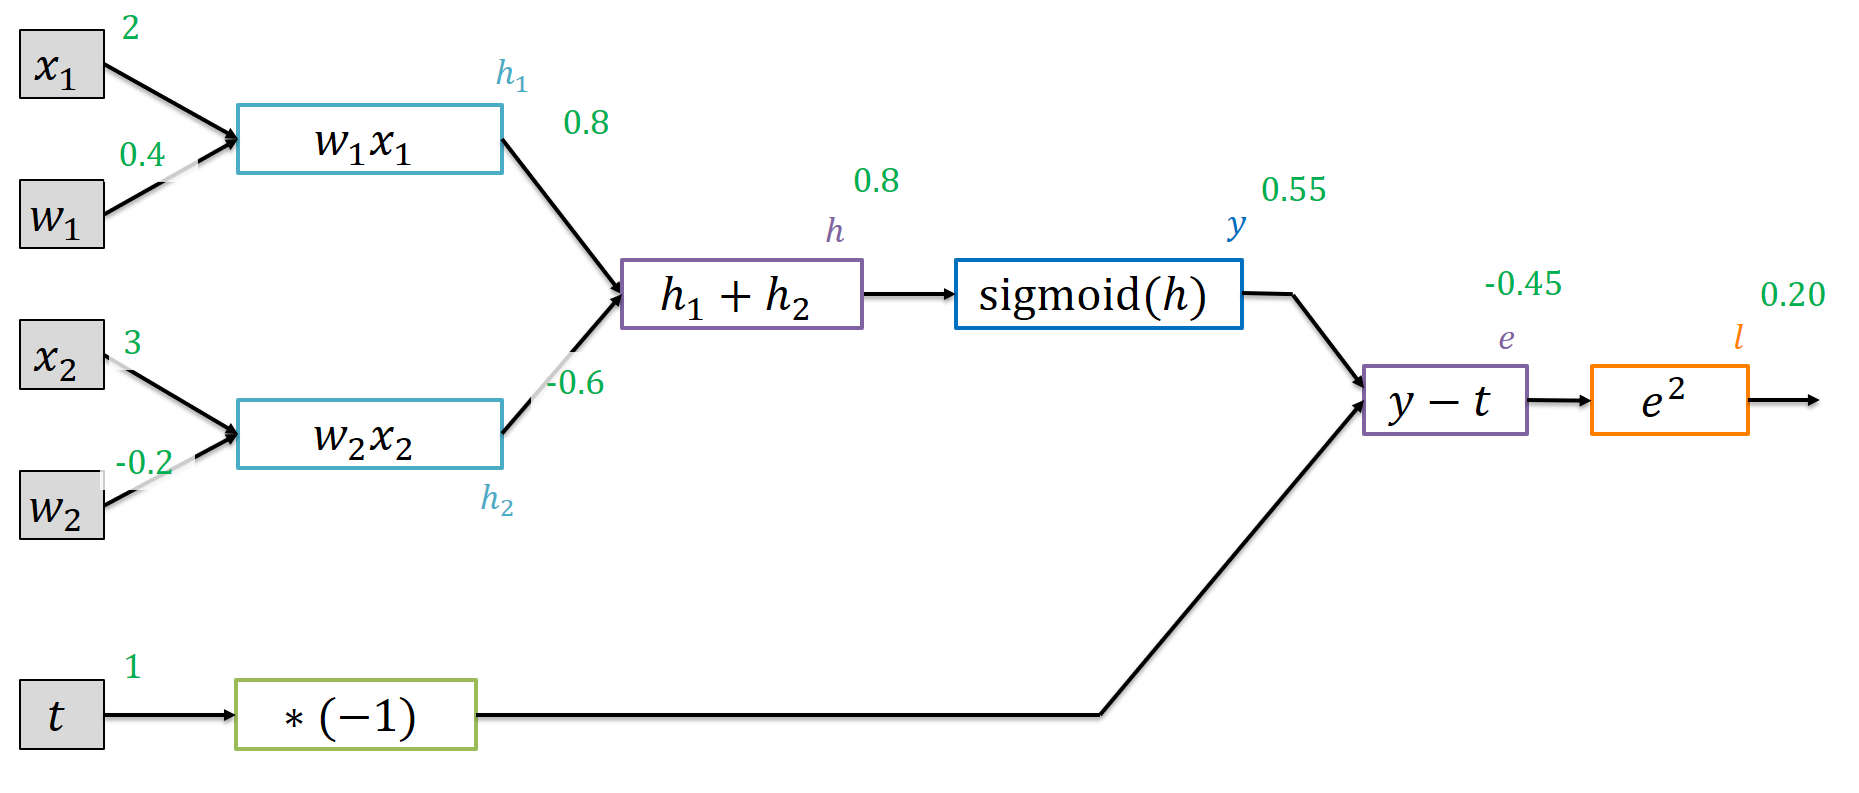 Applying reverse-mode autodiff to the loss function of a small network